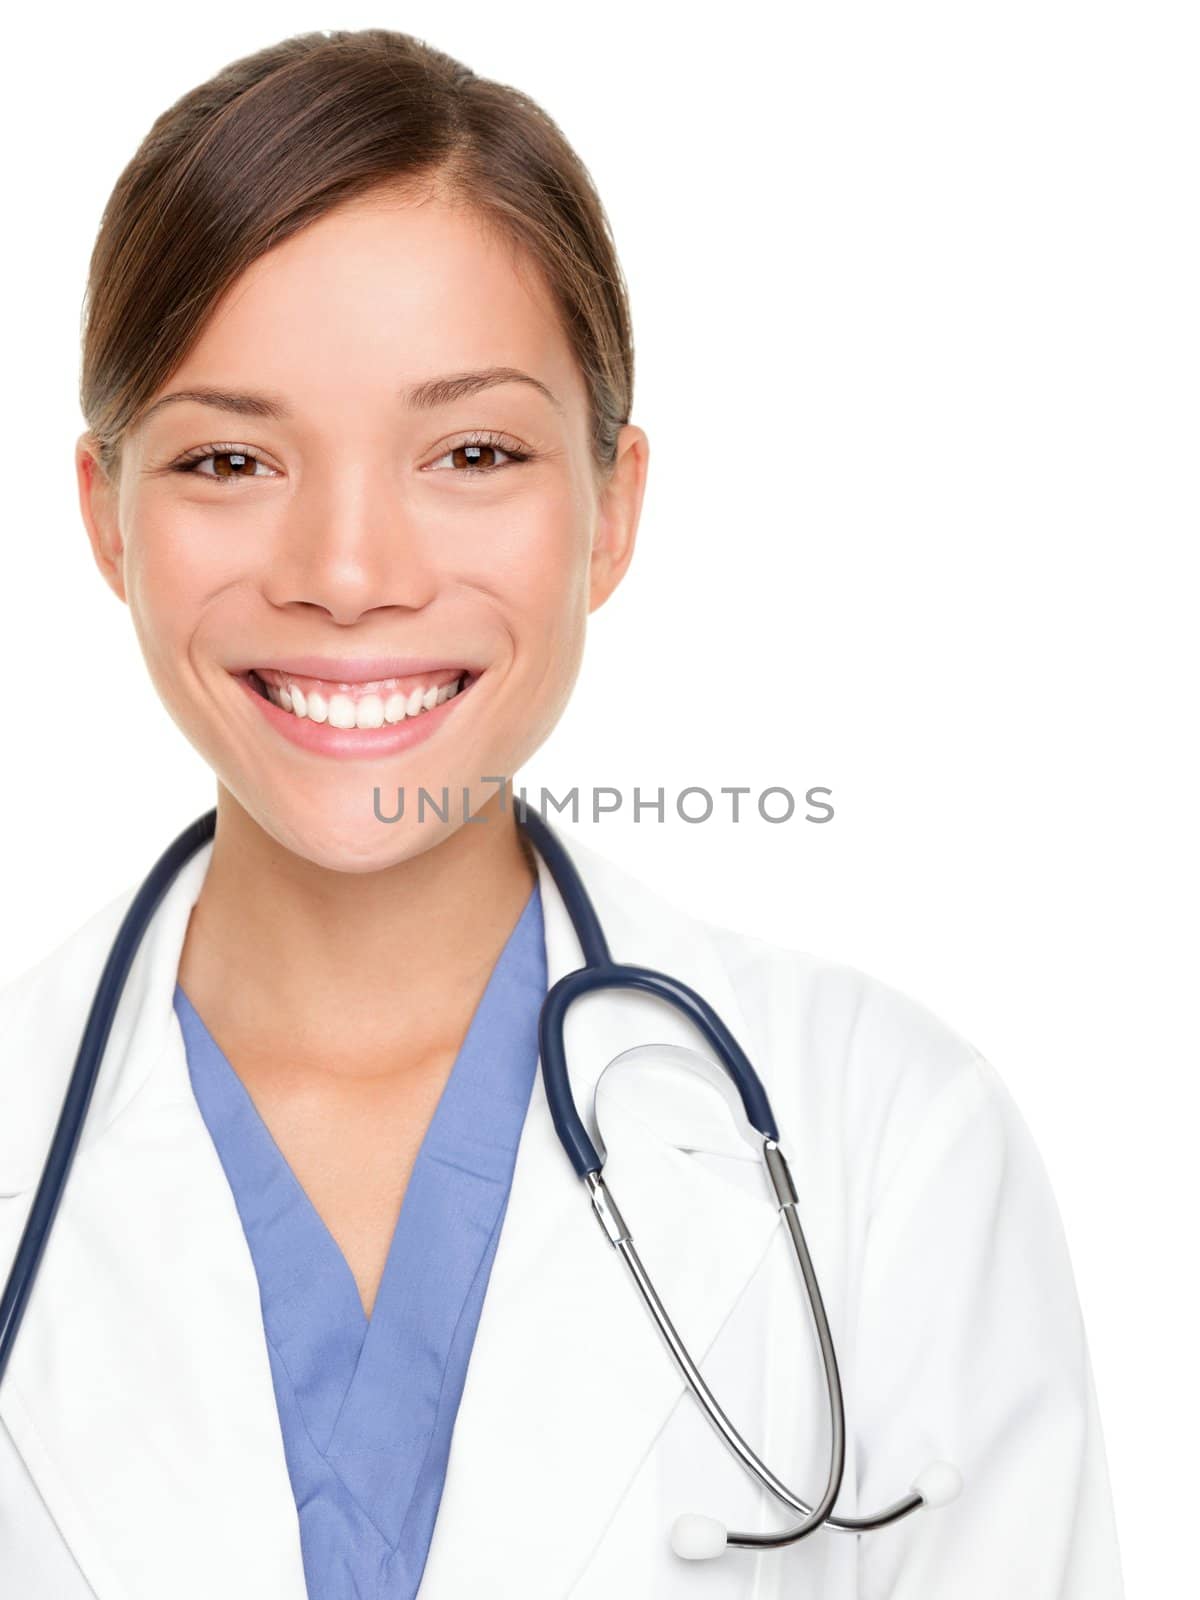 Female medical doctor smiling portrait. Multiracial Asian / Caucasian woman medical professional isolated on white background.